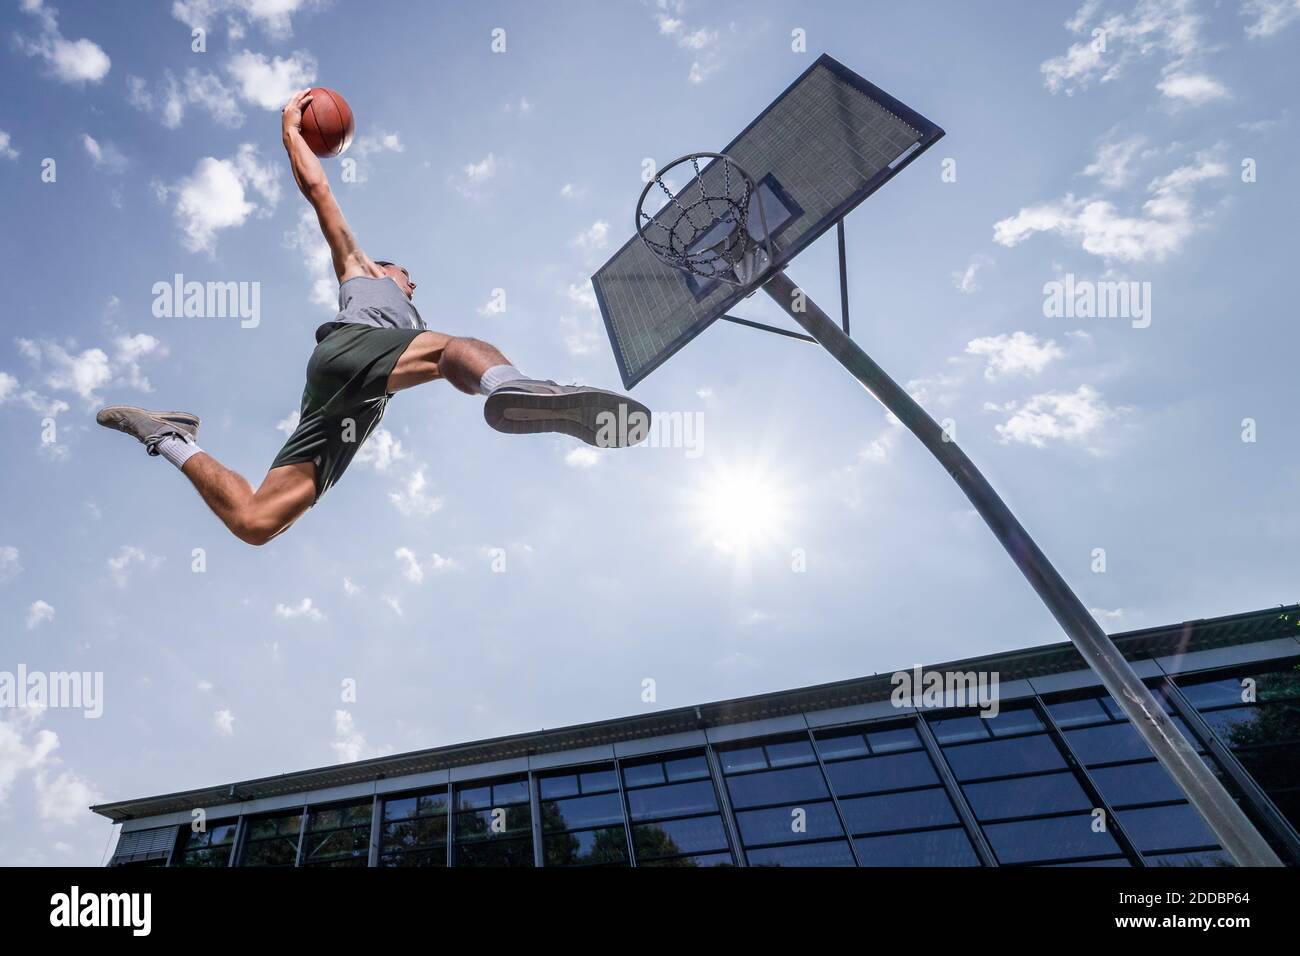 Young man dunking ball in hoop while playing basketball against sky on sunny day Stock Photo